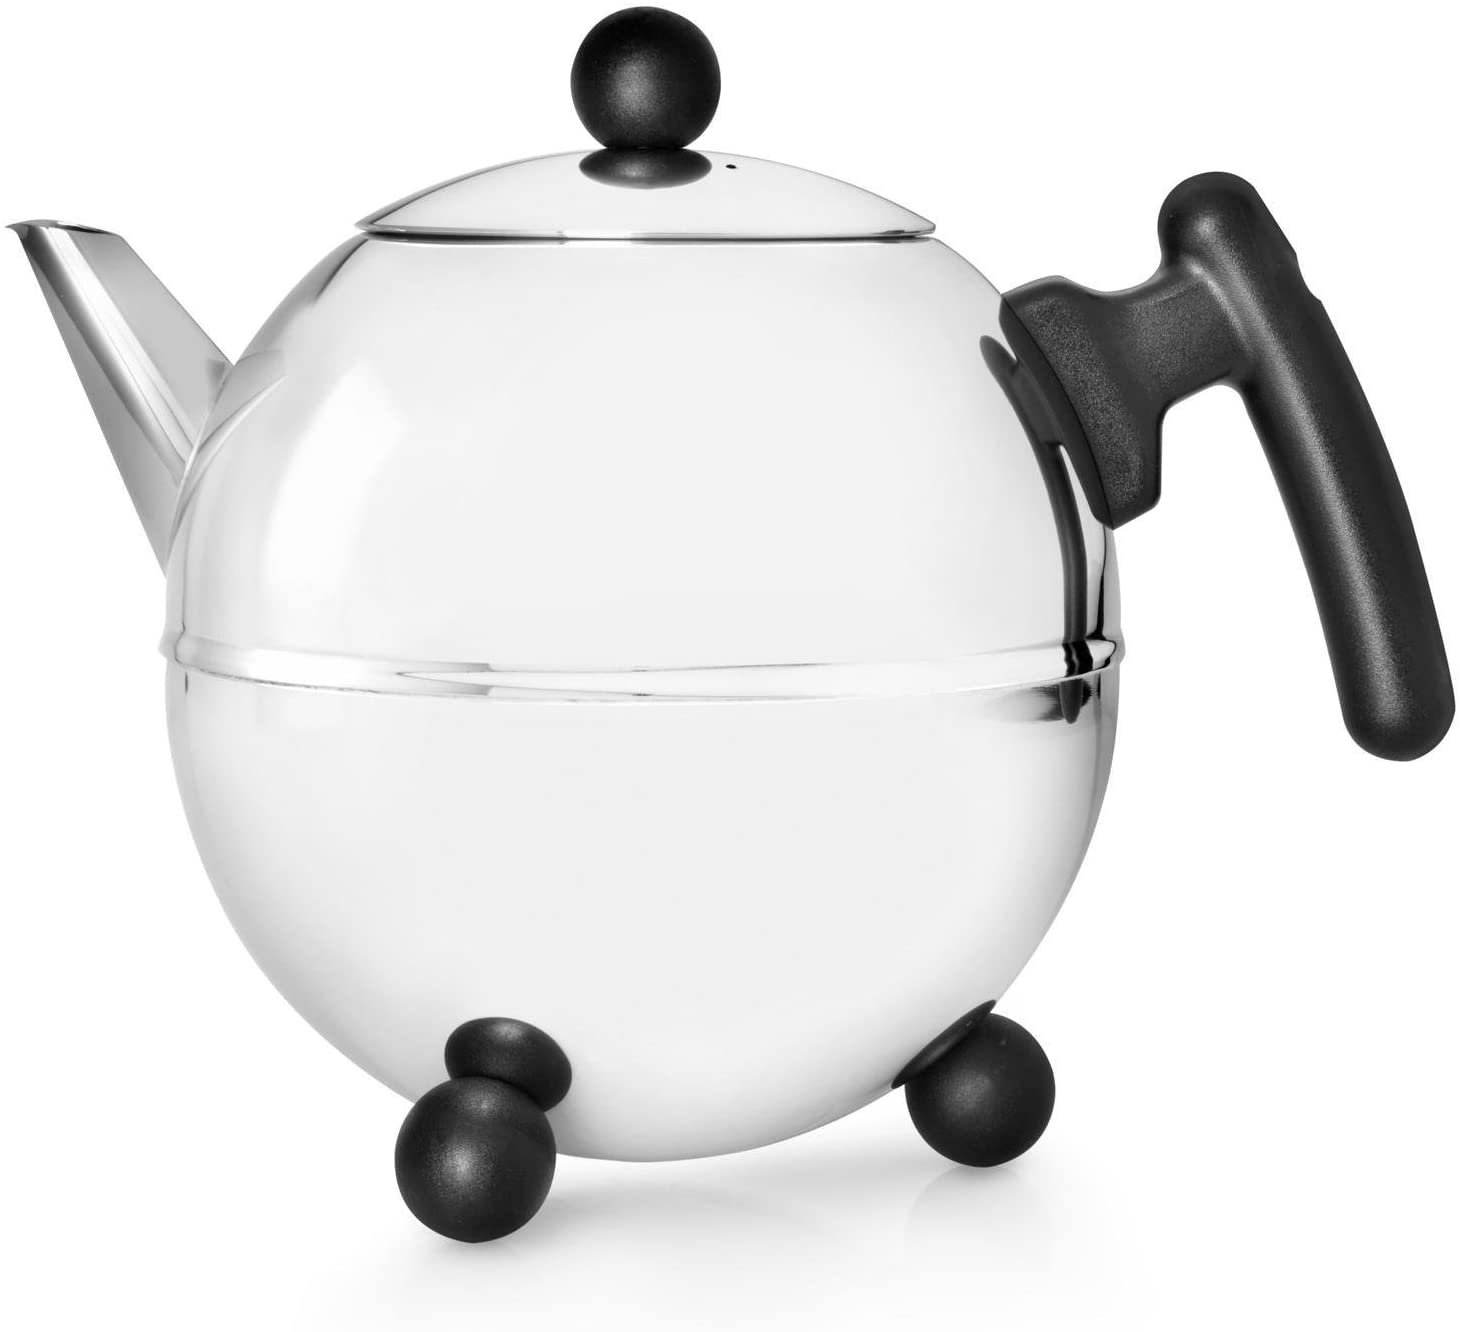 Teapot Bella Ronde with Handle and Feet in Black Volume: 1.5 l